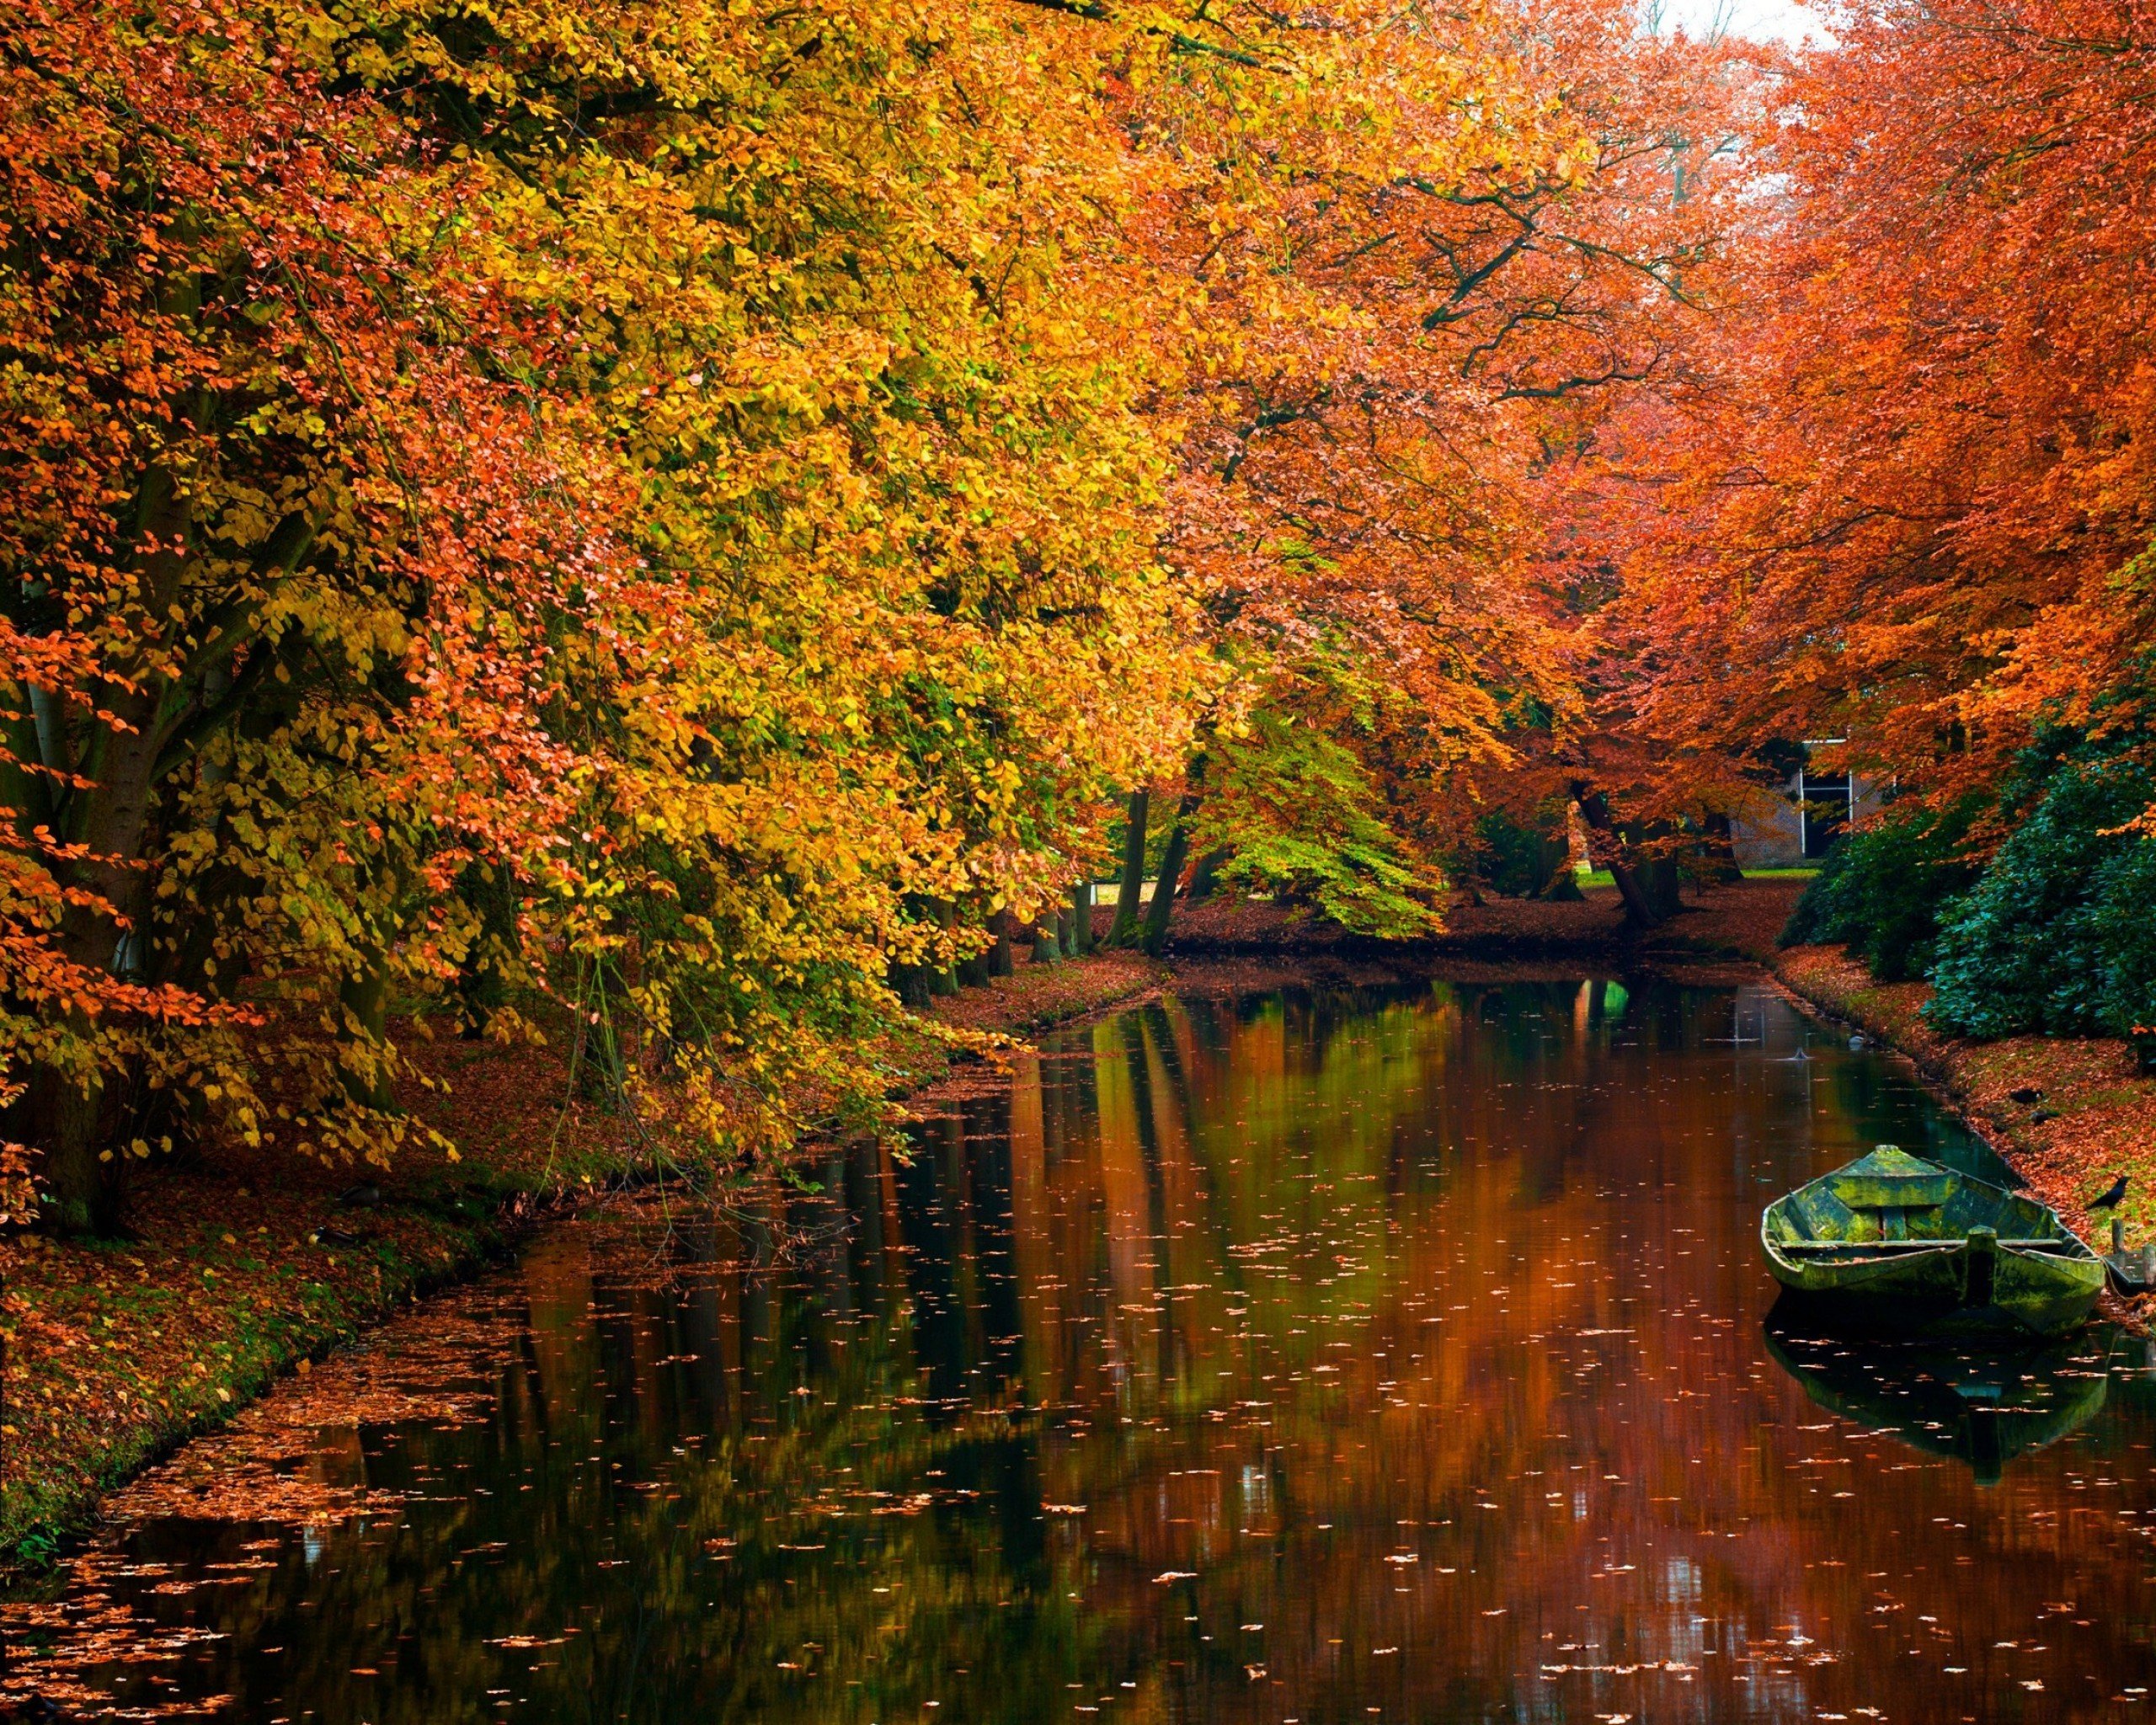 autumn wallpaper for android,natural landscape,nature,tree,leaf,reflection